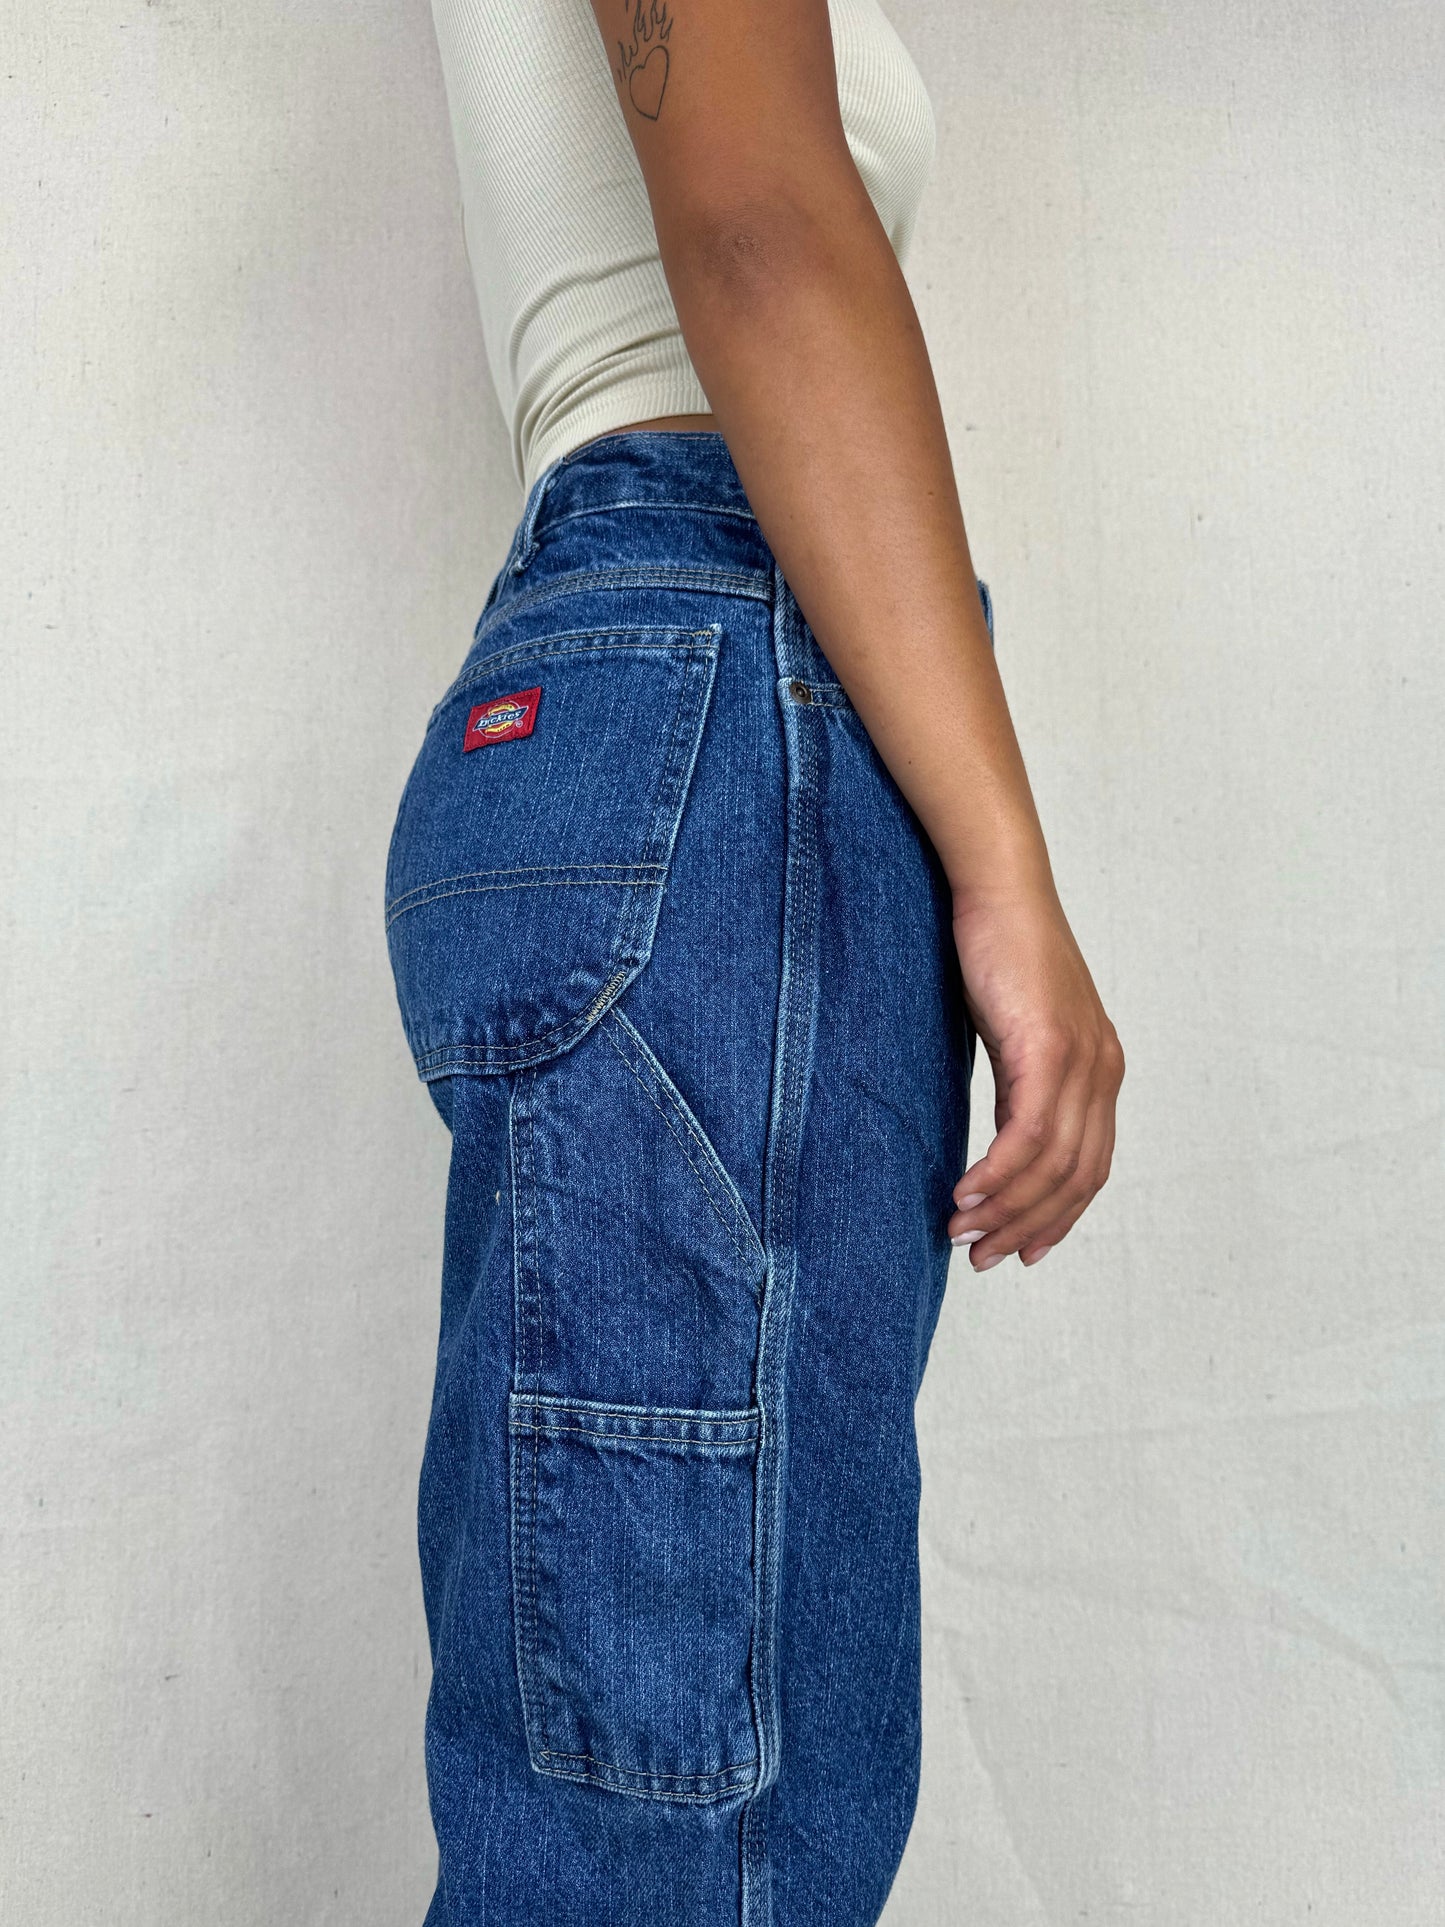 90's Dickies Heavy Duty Vintage Carpenter Jeans Size 31x33